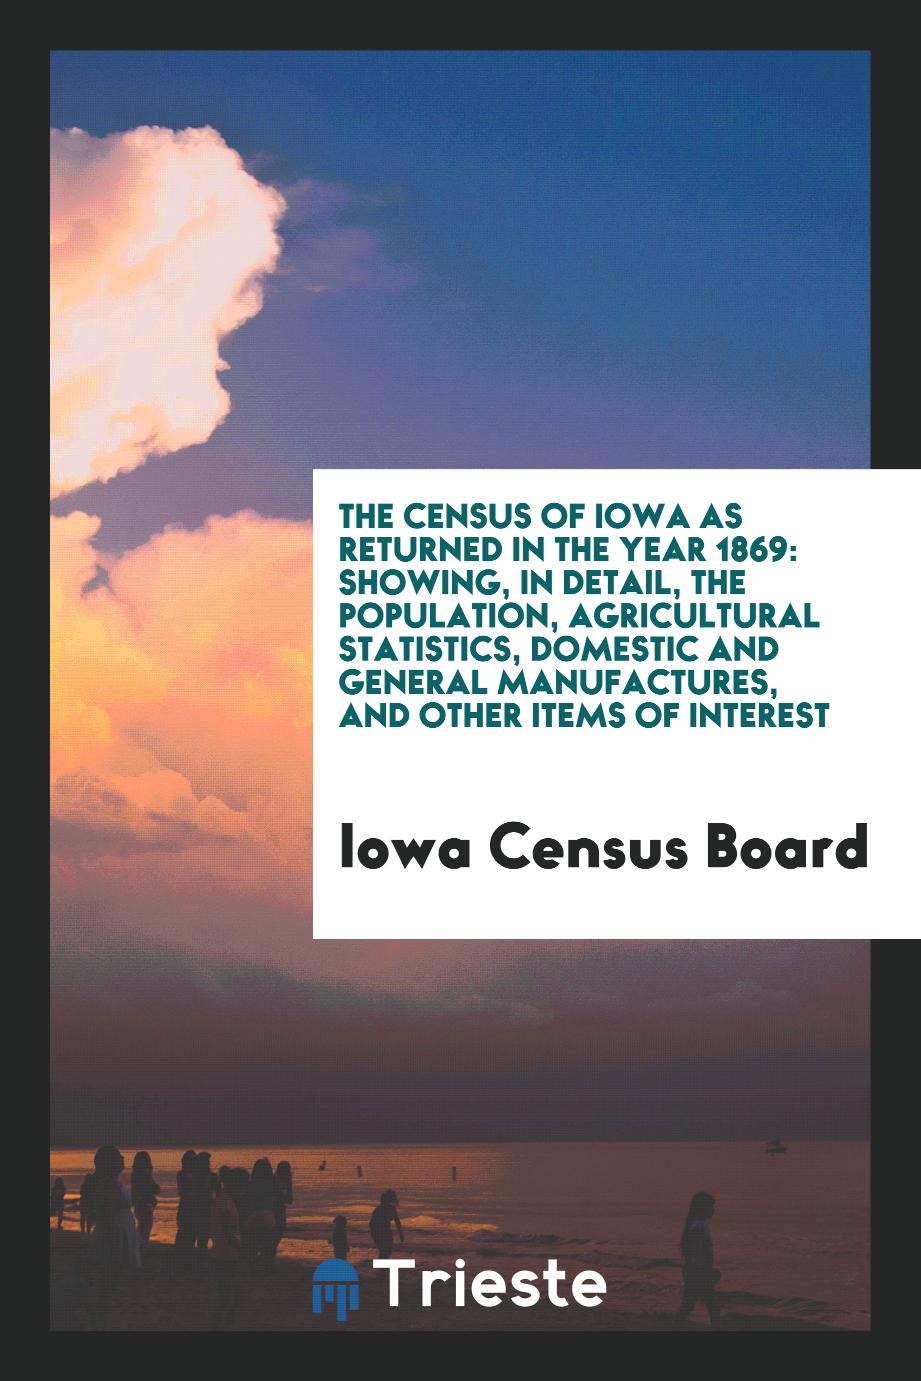 The Census of Iowa as Returned in the Year 1869: Showing, in Detail, the Population, Agricultural Statistics, Domestic and General Manufactures, and Other Items of Interest